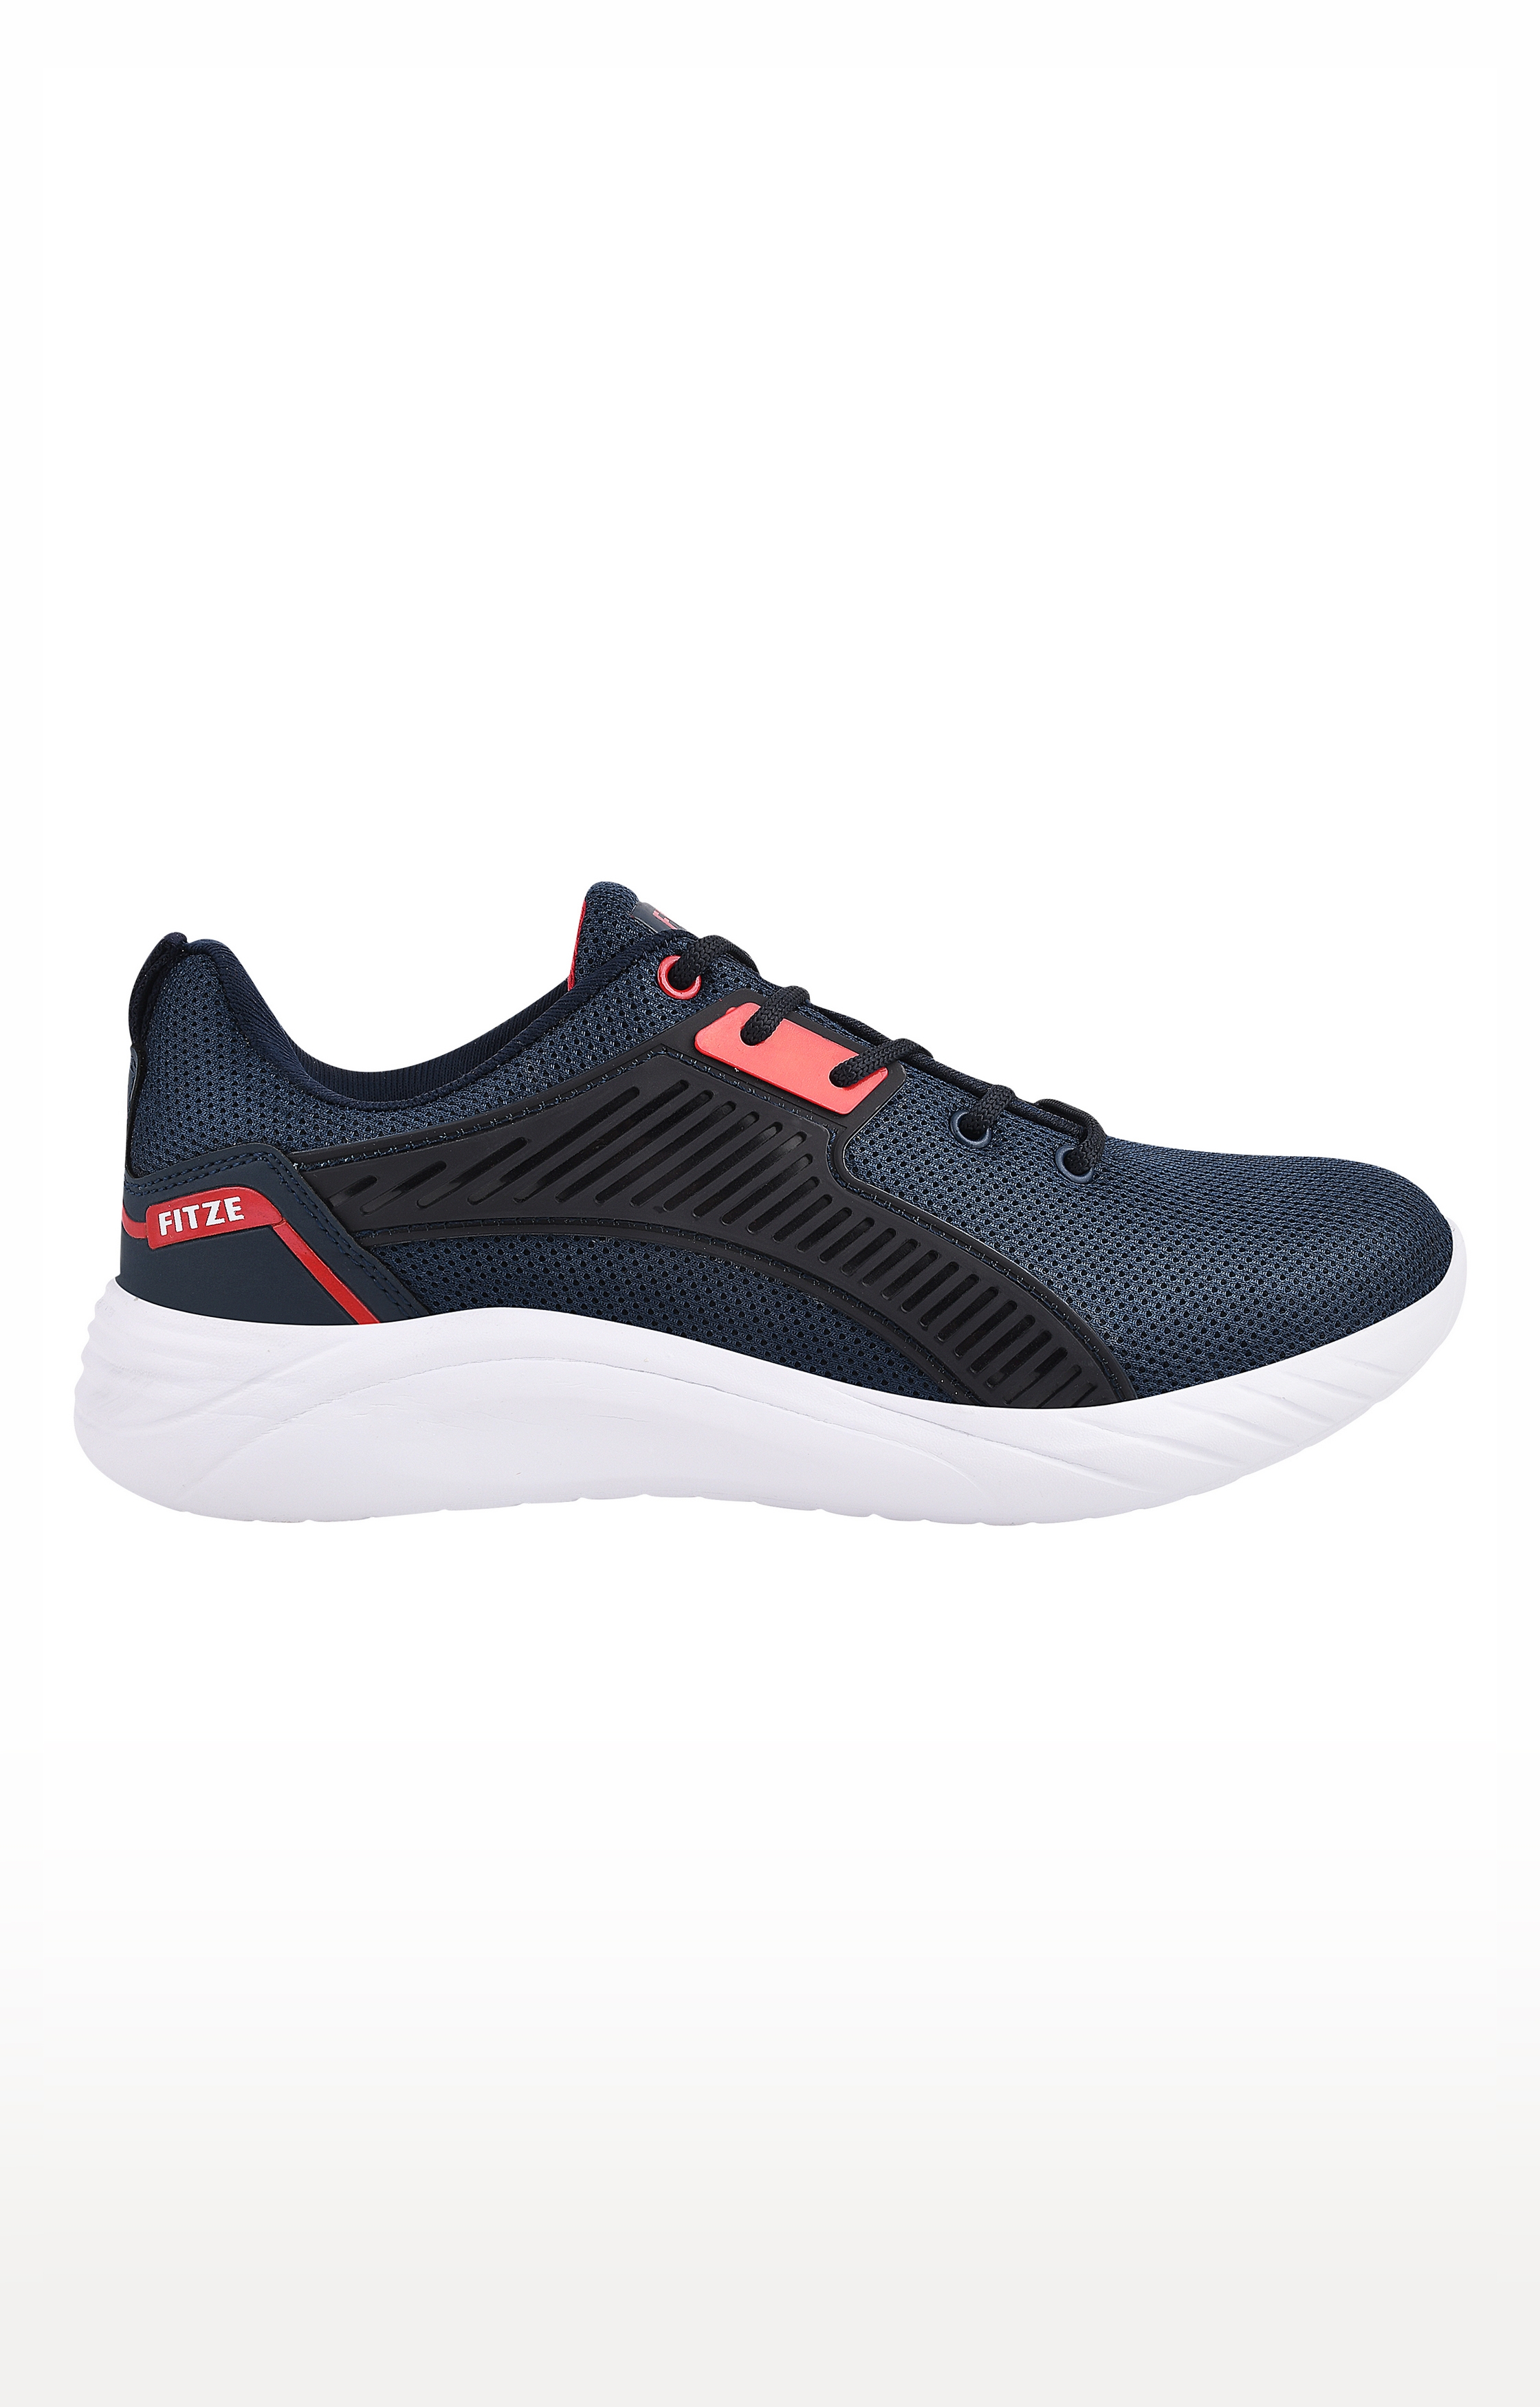 Blue Running Shoes (FLC_19_NAVY_RED)